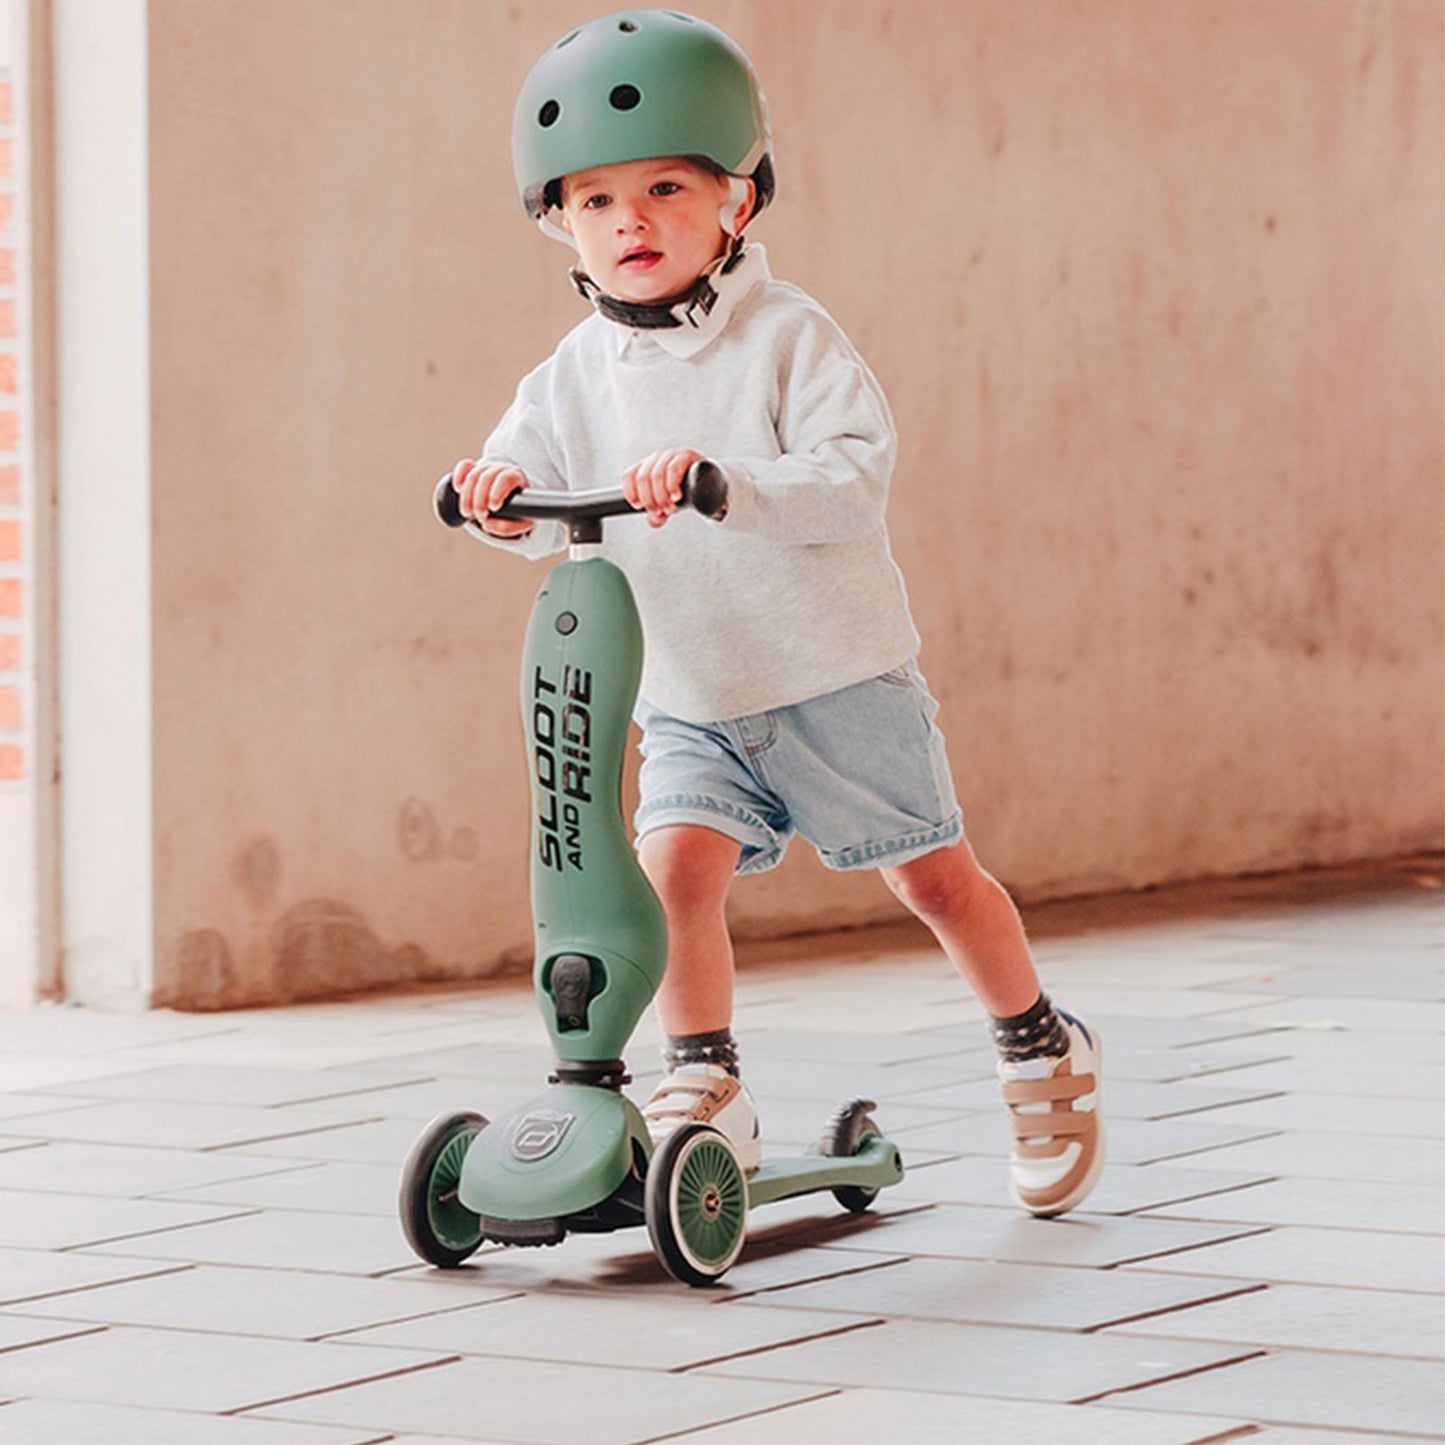 Scoot & Ride - Highwaykick1 Scooter For Toddler 1-5Y (Forest)